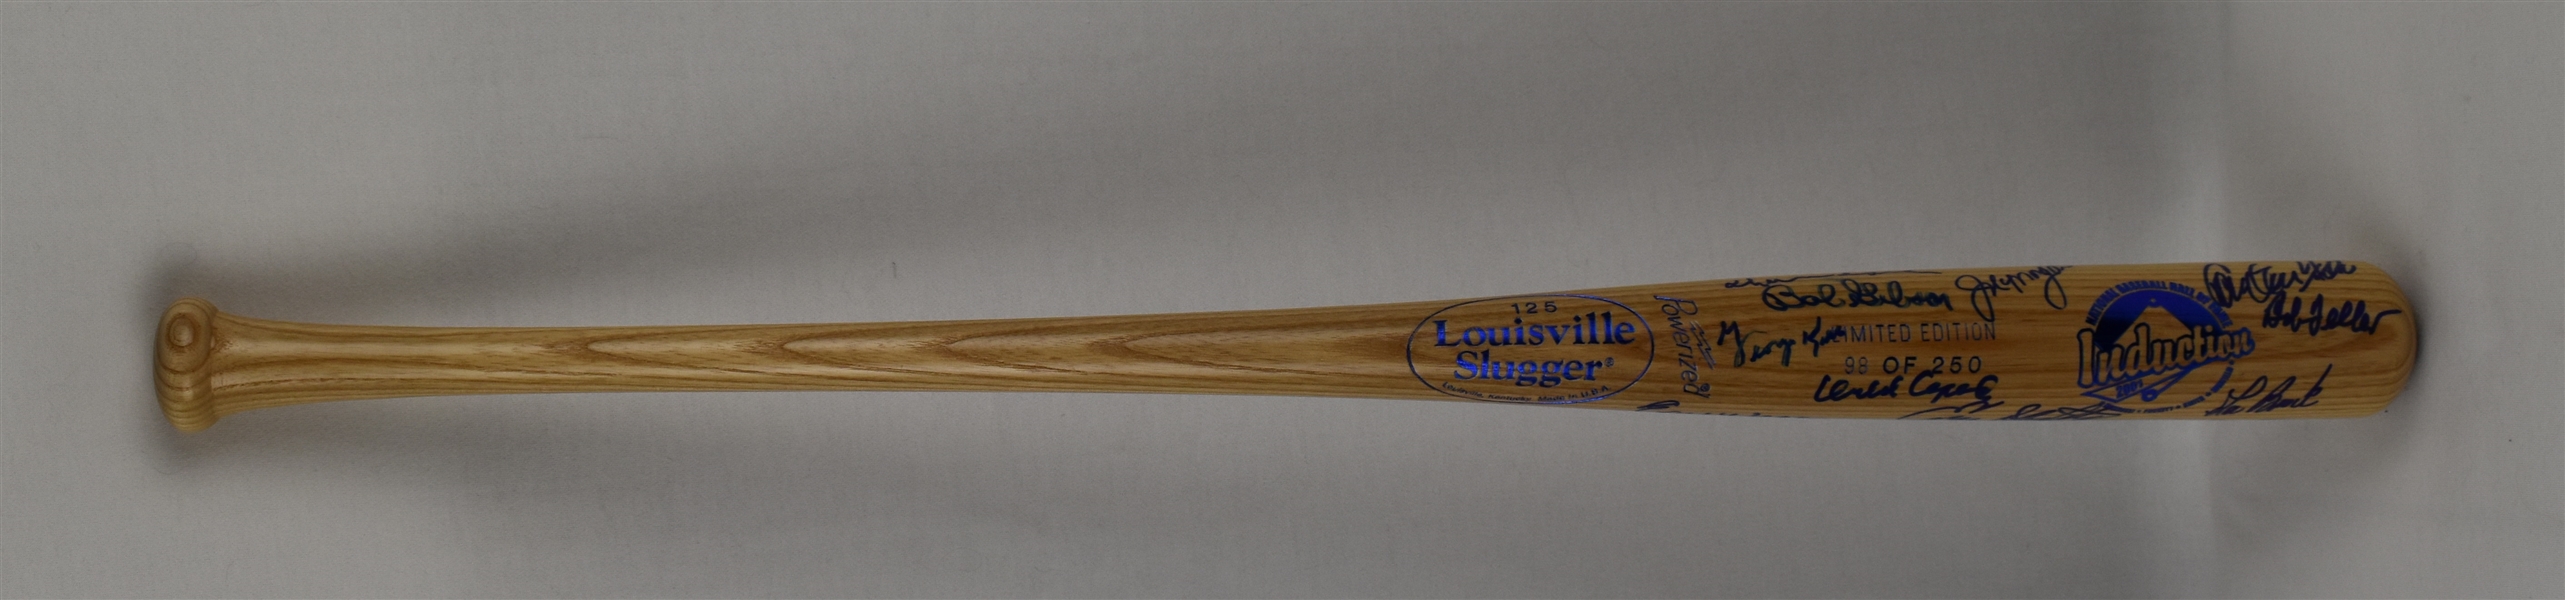 Limited Edition #98/250 Autographed 2001 Hall of Fame Induction Bat w/Puckett Family Provenance